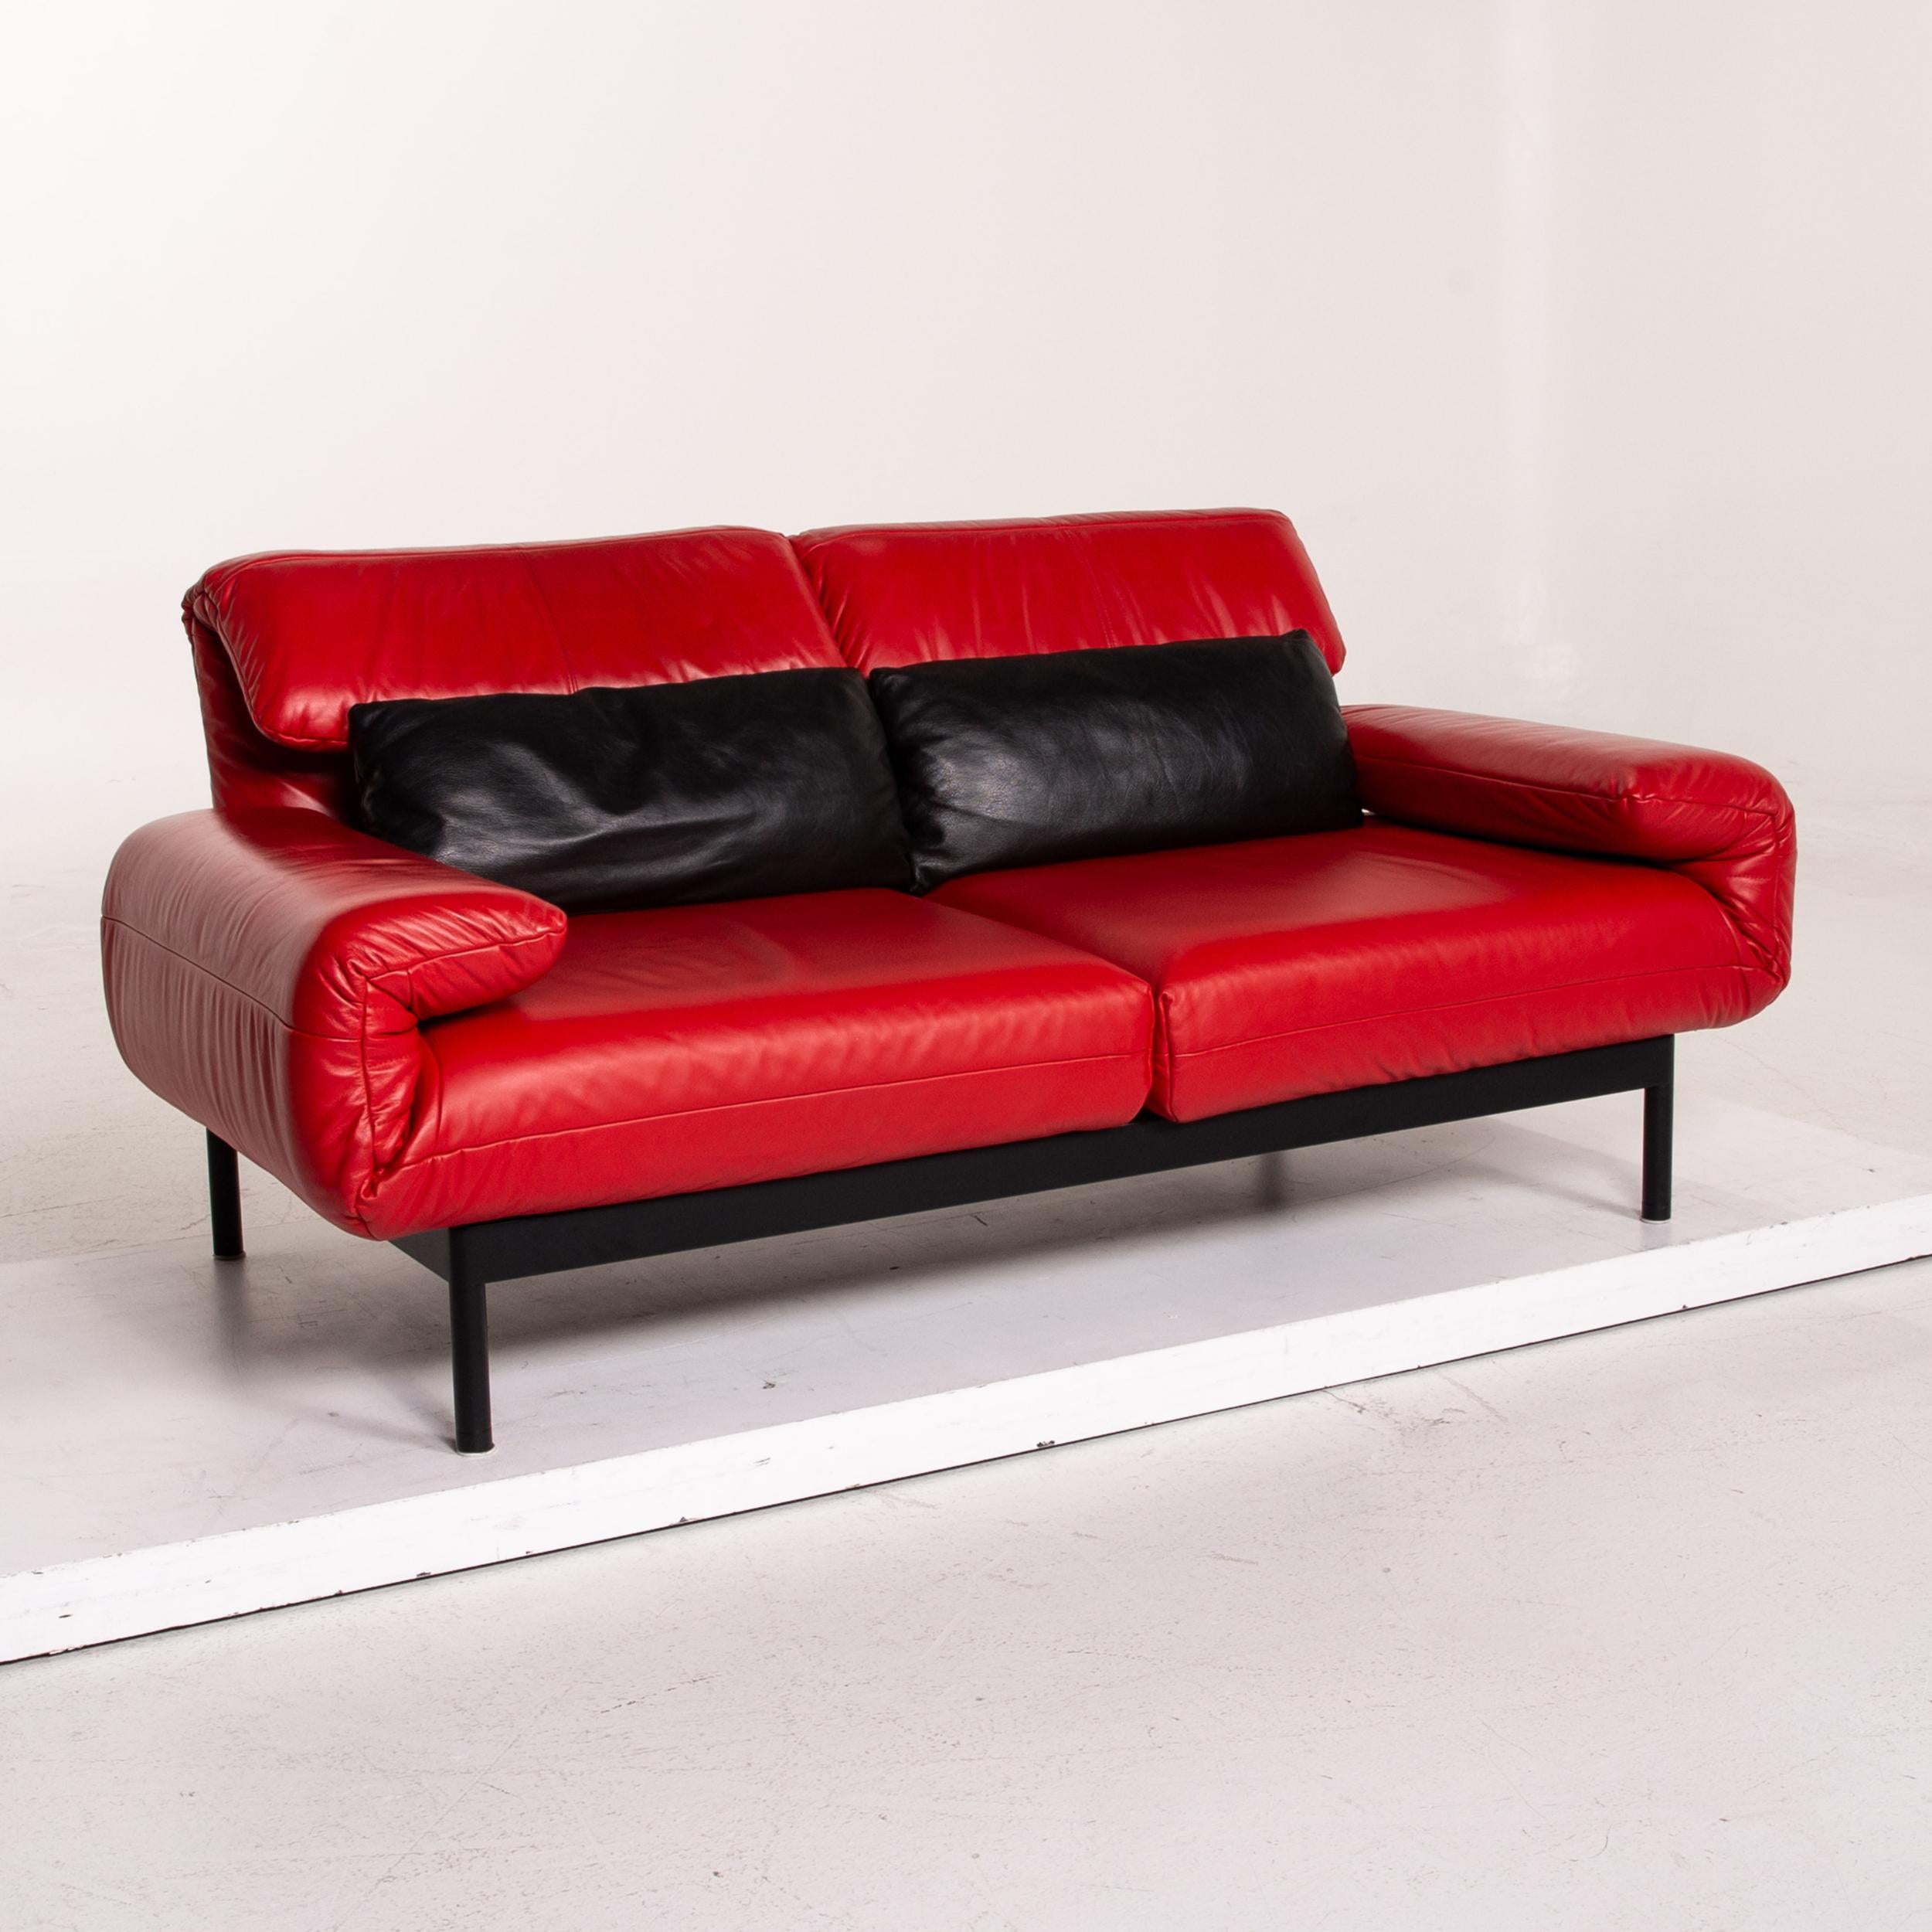 Rolf Benz Plura Leather Sofa Red Black Two-Seat Function Relax Function Couch For Sale 3